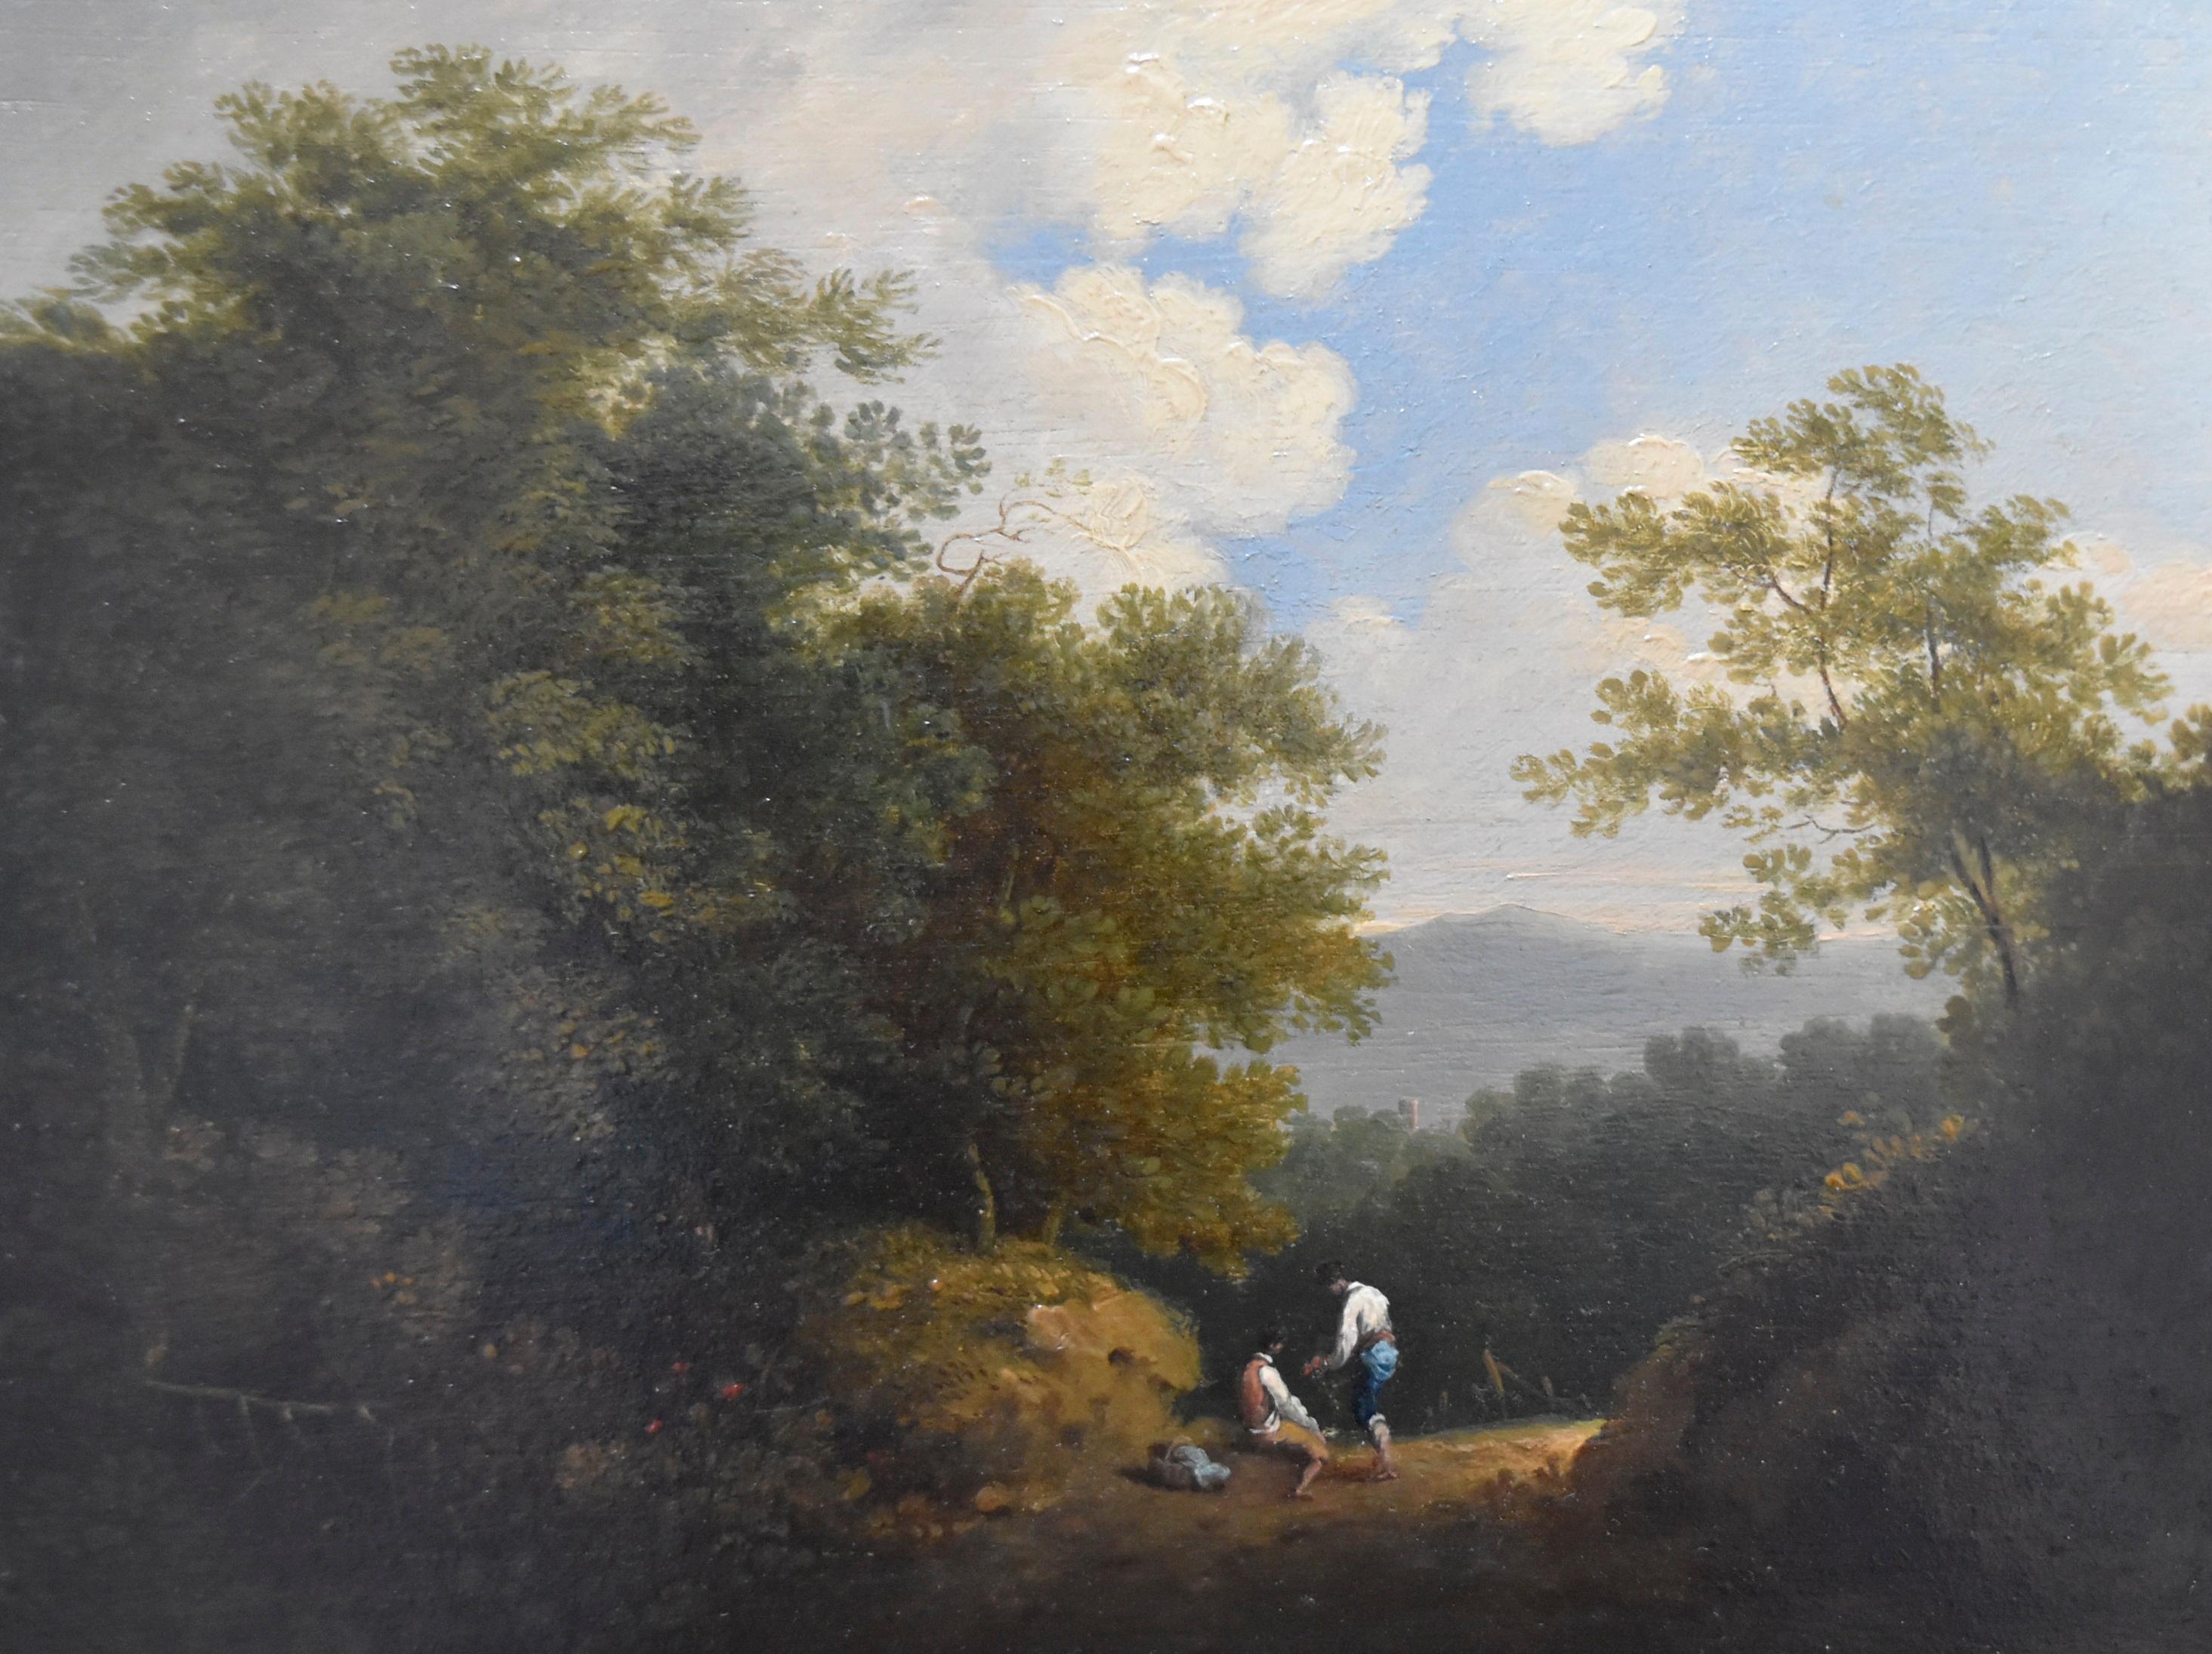 John Warwick Smith (1749-1831) Lanscape with two travellers, oil on panel 1